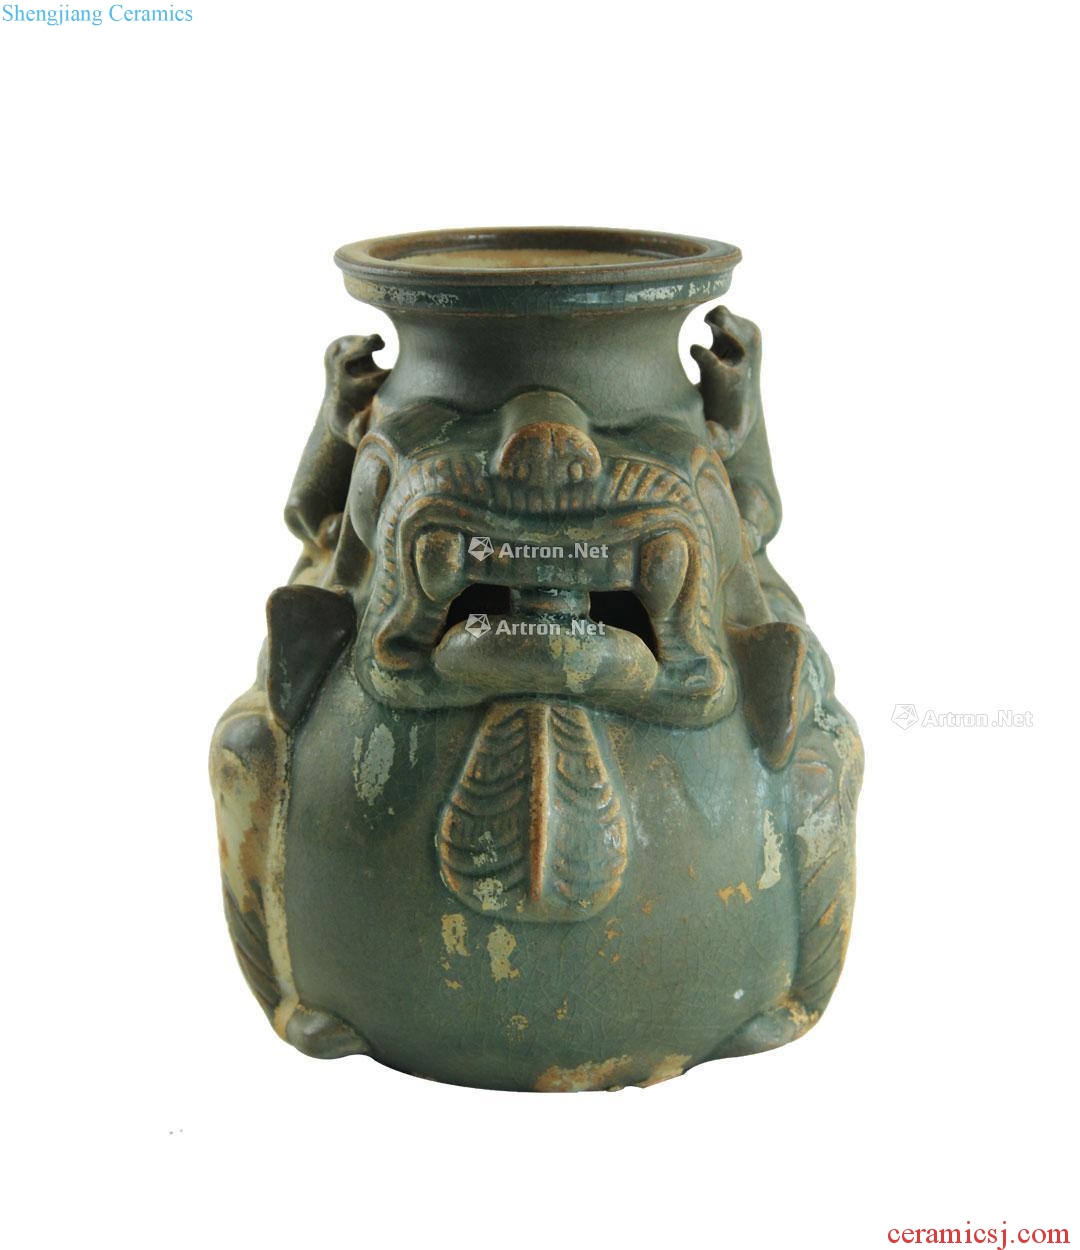 The song dynasty Your kiln green glaze in the bear type